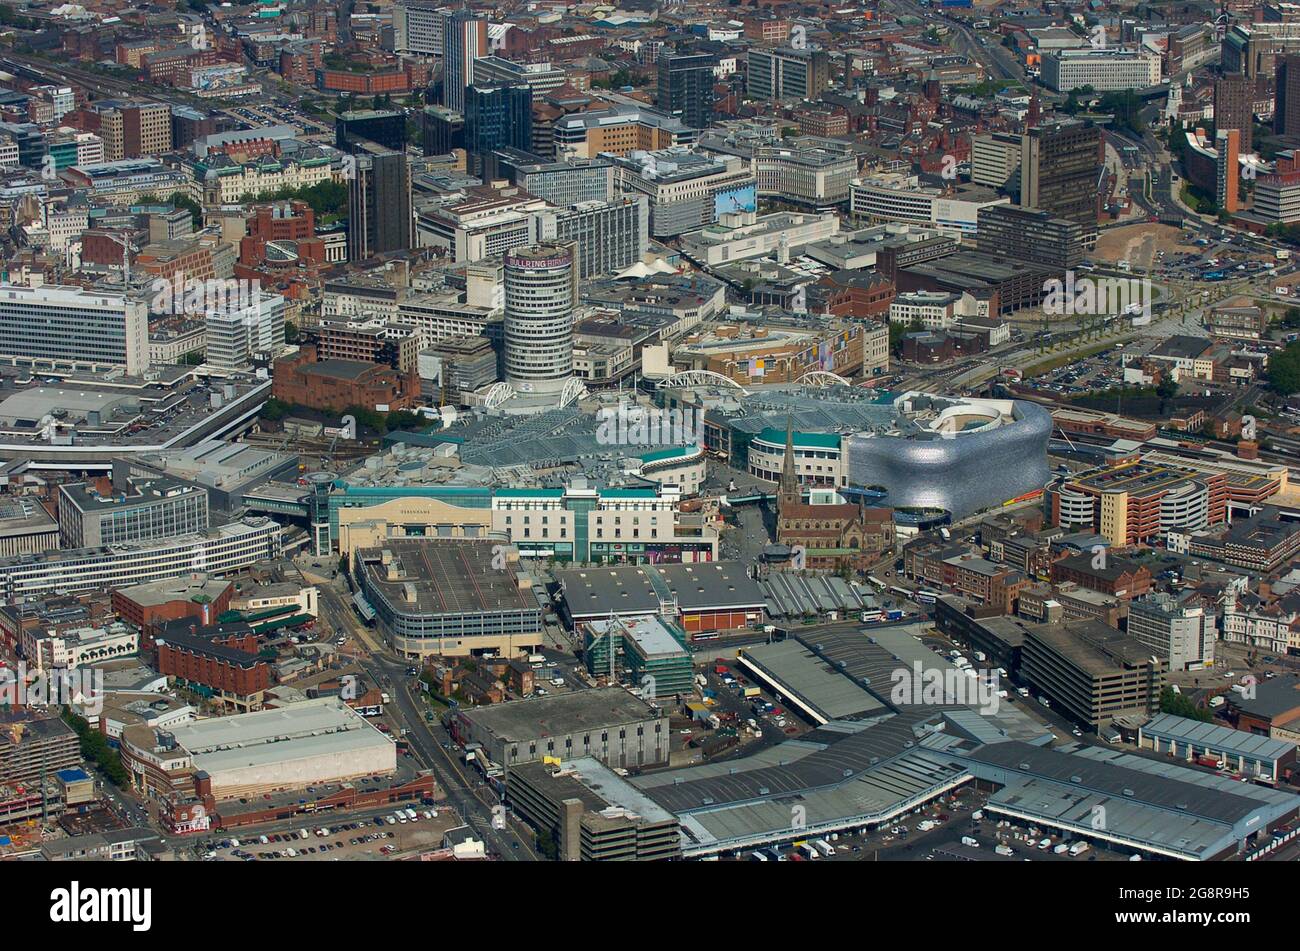 Aerial view of Birmingham showing the Rotunda and the Bull Ring Shopping Centre Stock Photo